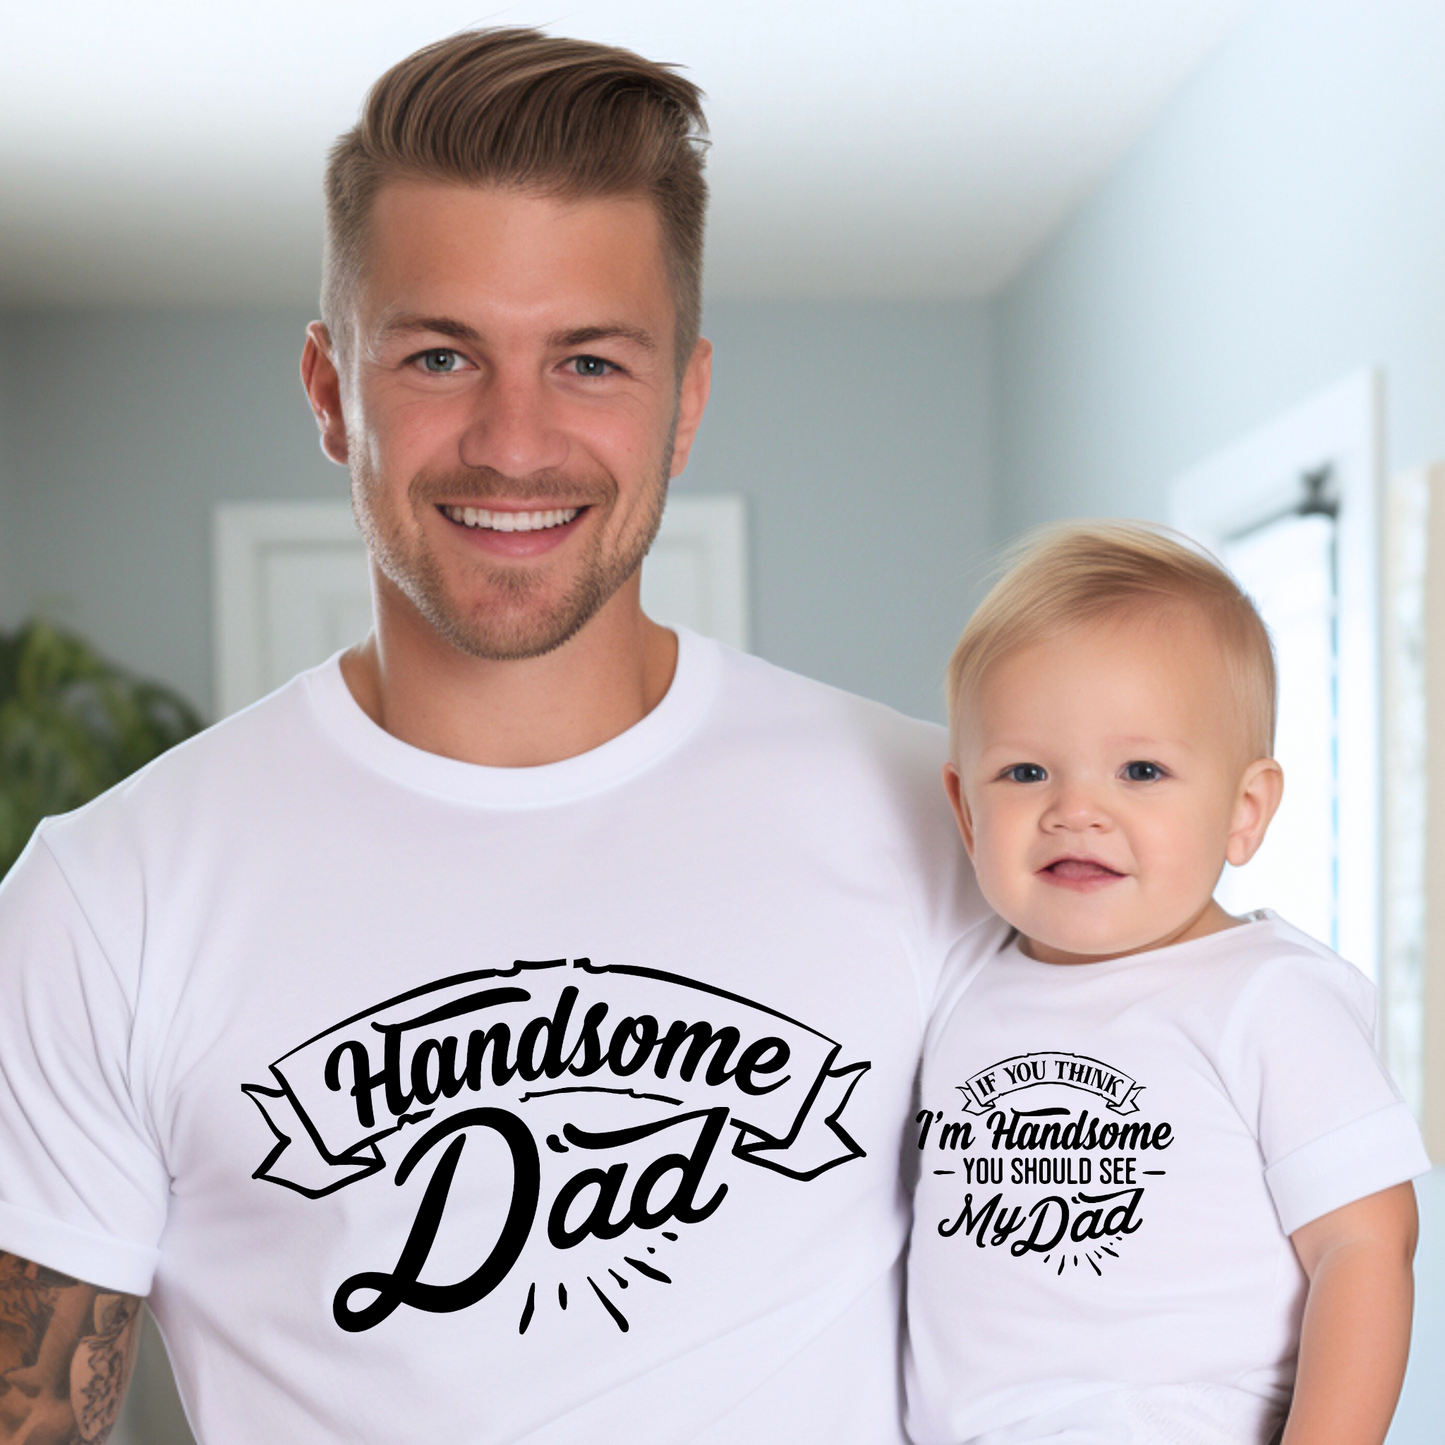 Handsome Dad, Handsome Baby - Father and Son Shirts